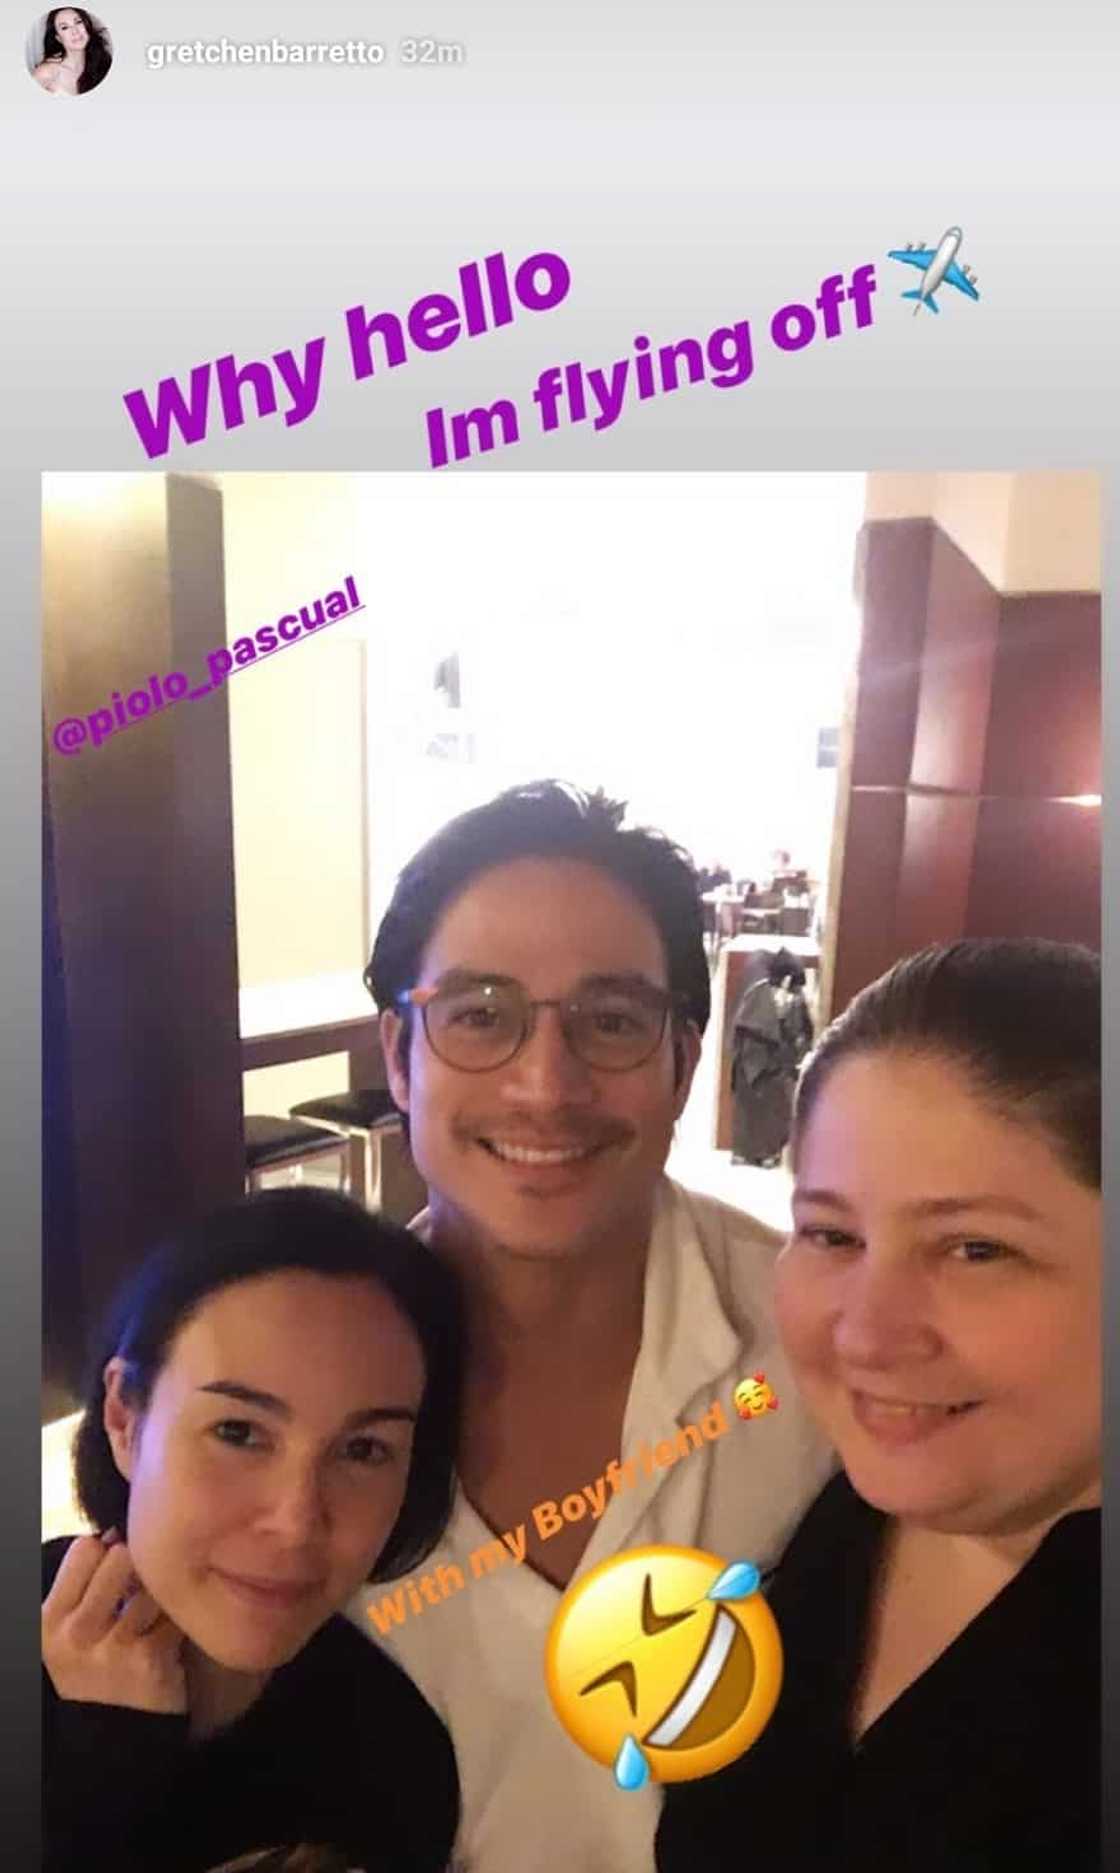 Gretchen Barretto makes fun of sister Marjorie in her post about Piolo Pascual